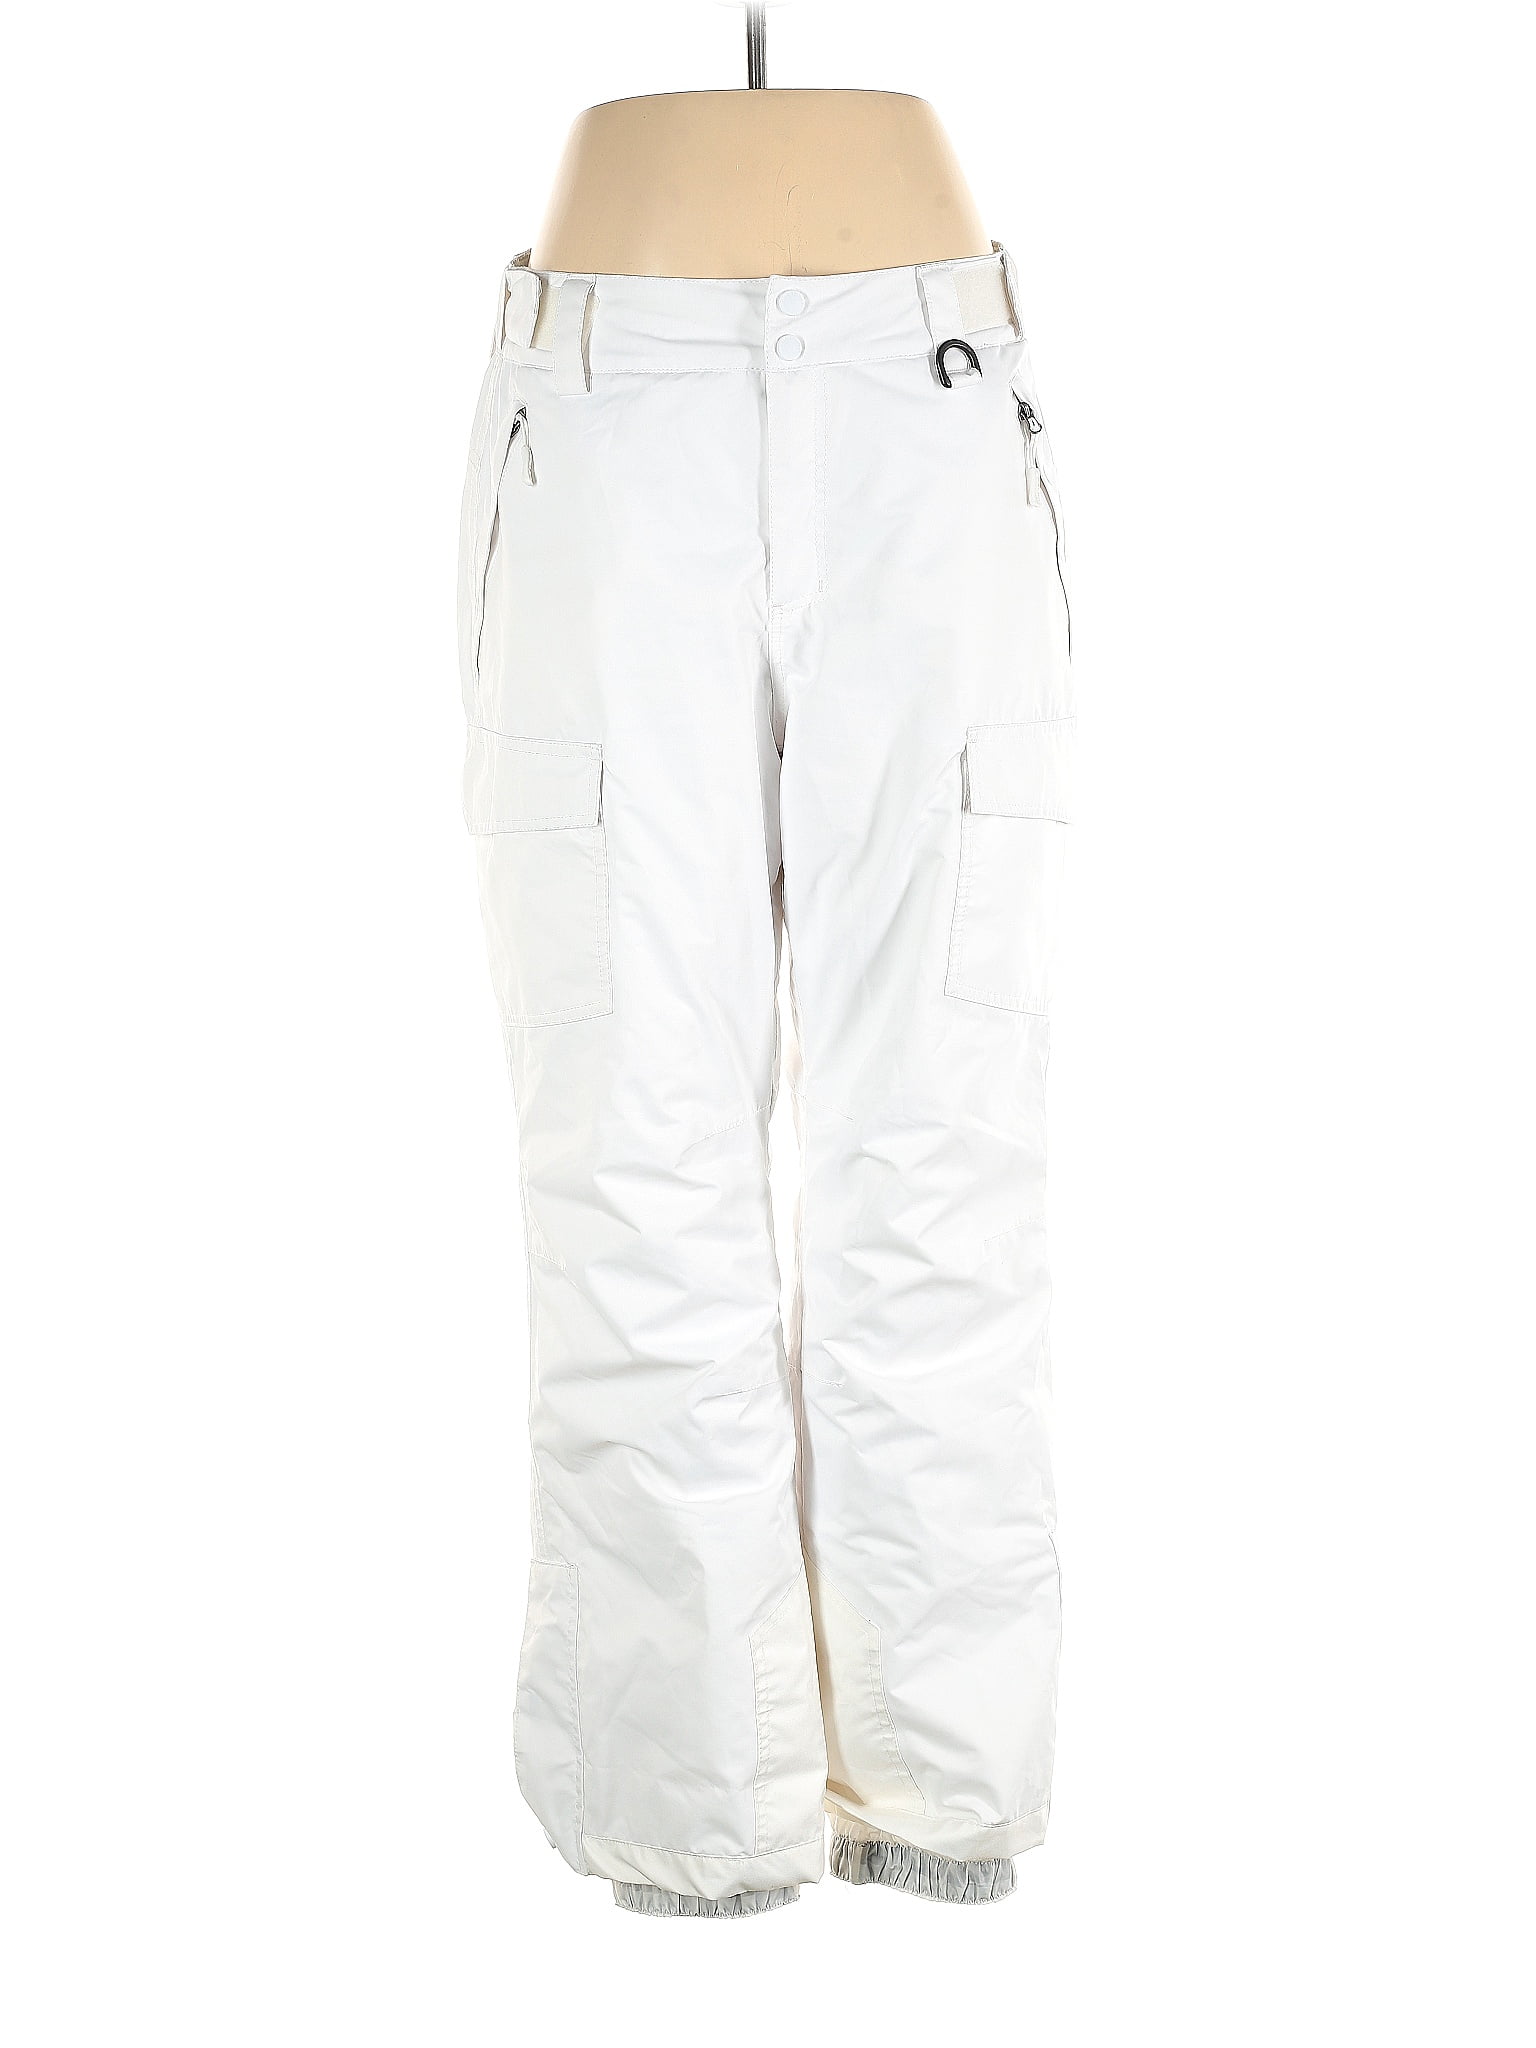 Assorted Brands 100% Polyester Solid White Cargo Pants Size L - 54% off ...